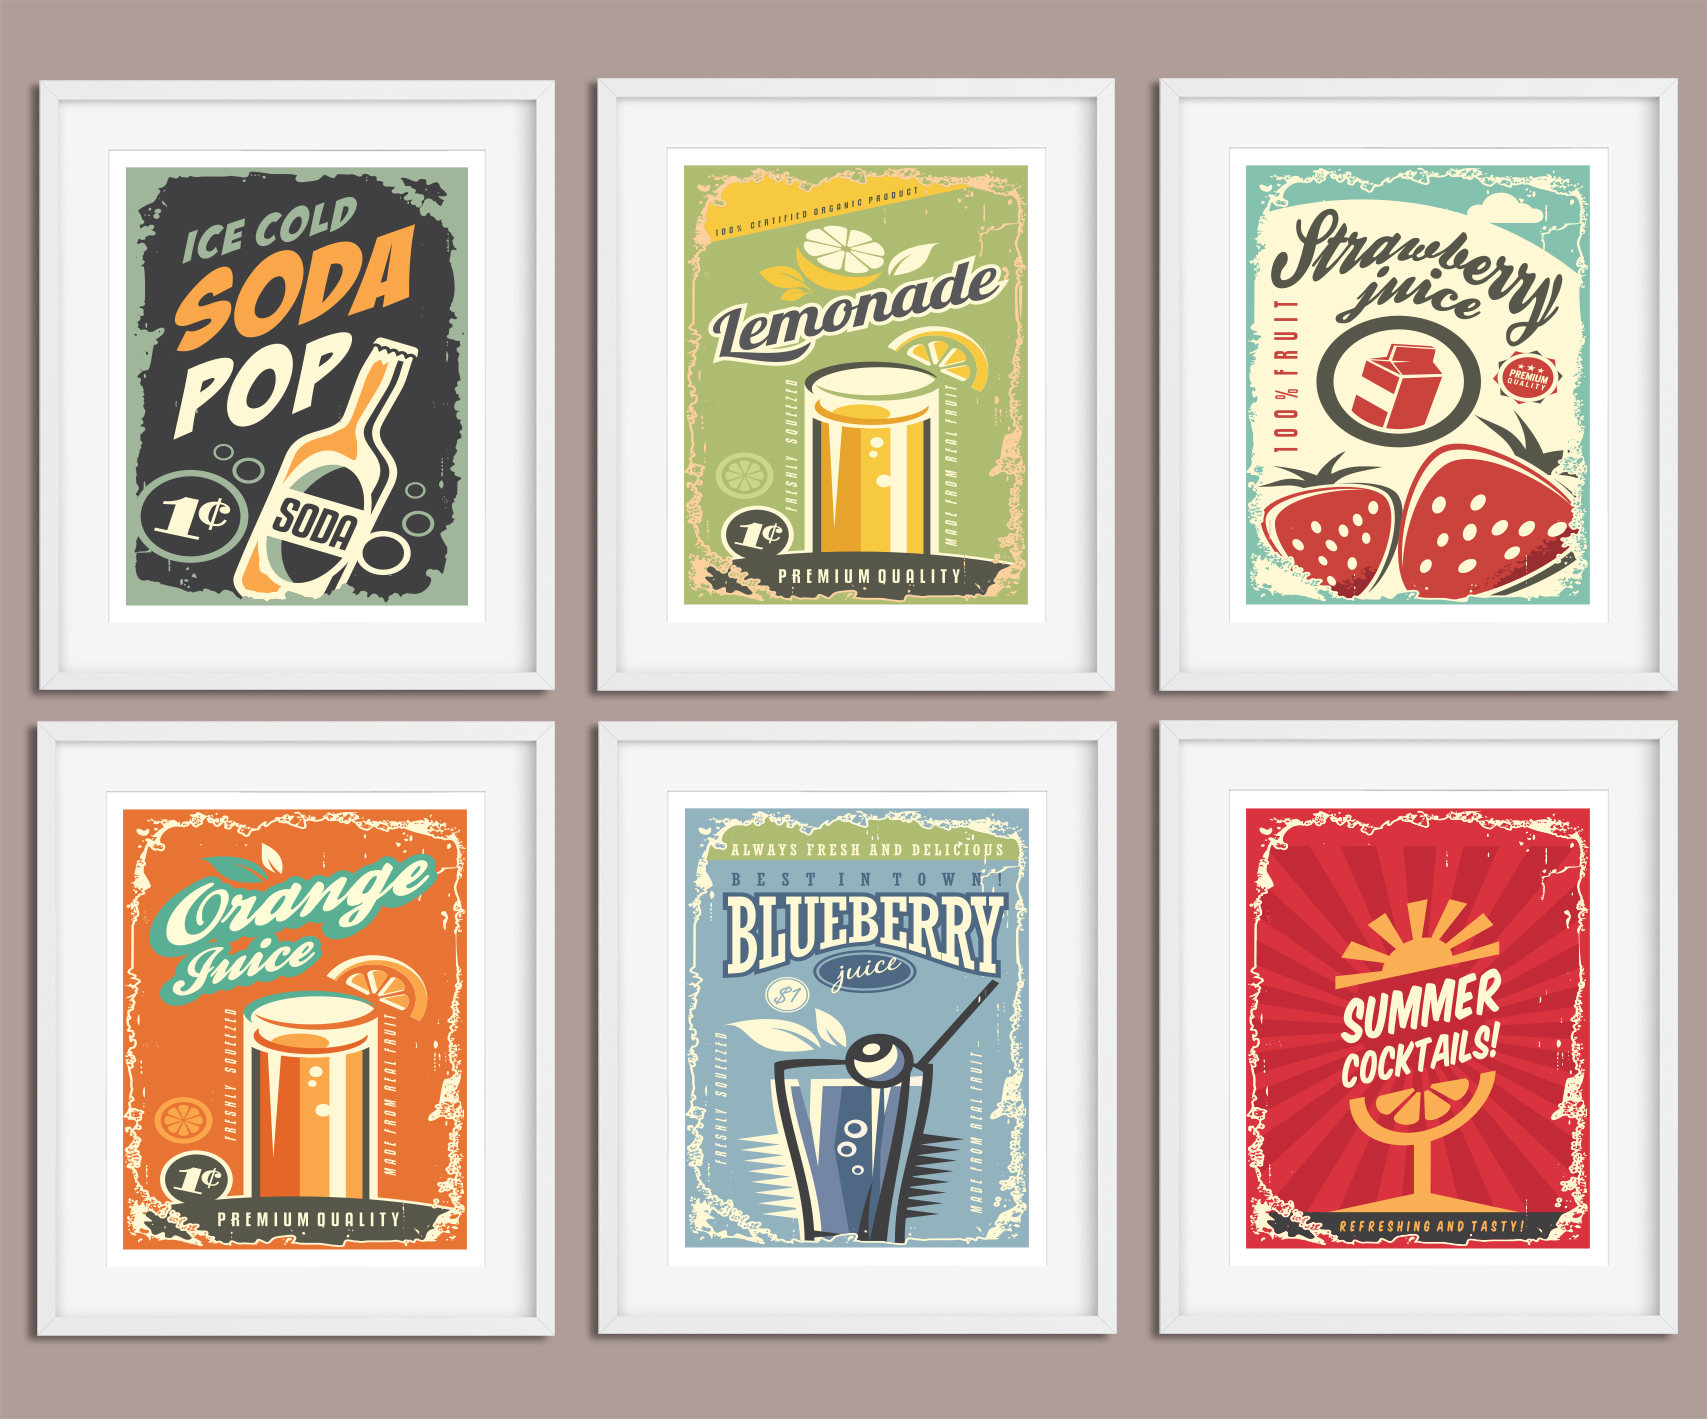 https://www.etsy.com/listing/464063272/kitchen-print-set-kitchen-prints-wall？GA_order=most_relevant&GA_search_type=all&GA_view_type=gallery&GA_search_query=retro%20kitchen&ref=sc_gallery-1-1&plkey=abd760885955b7cc748127fb0629ad348640656d:464063272